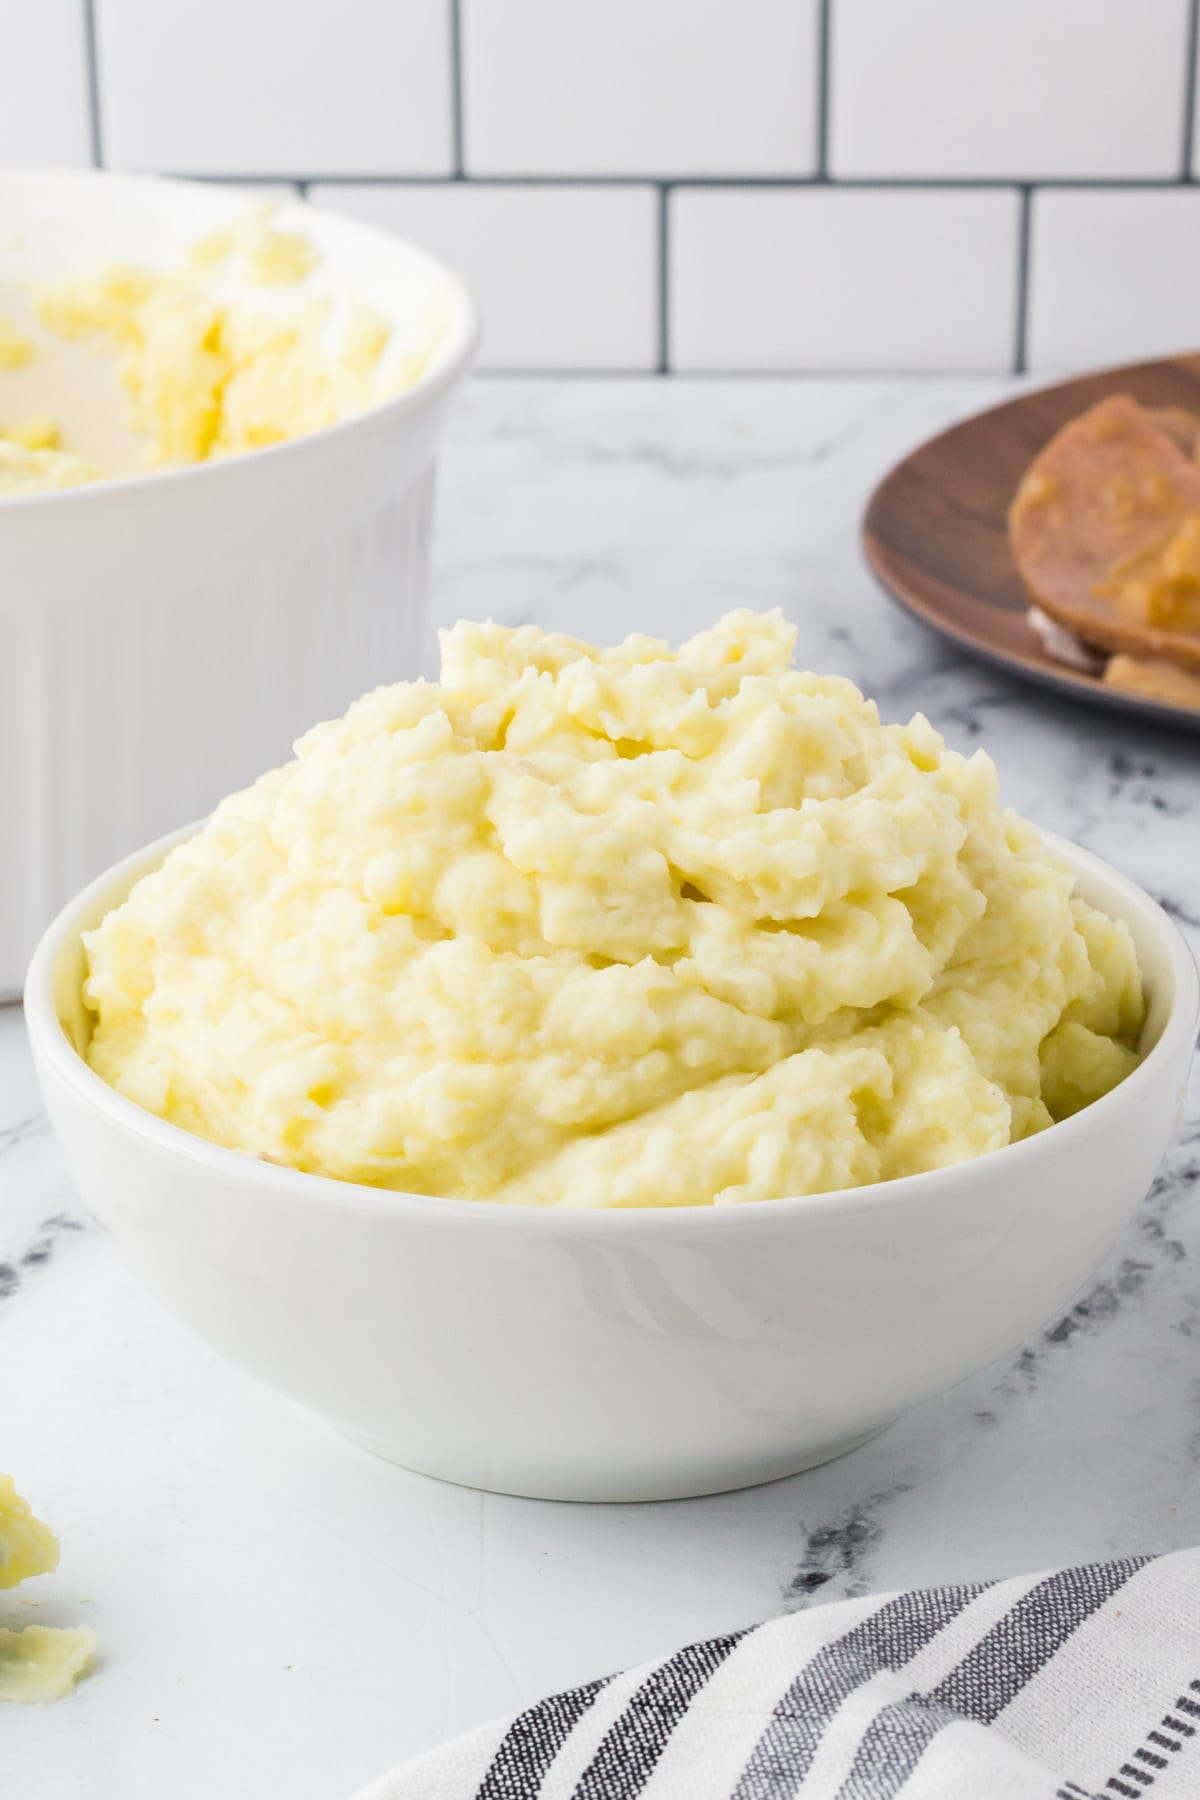 A bowl of mashed potatoes next to a bowl of mashed potatoes.